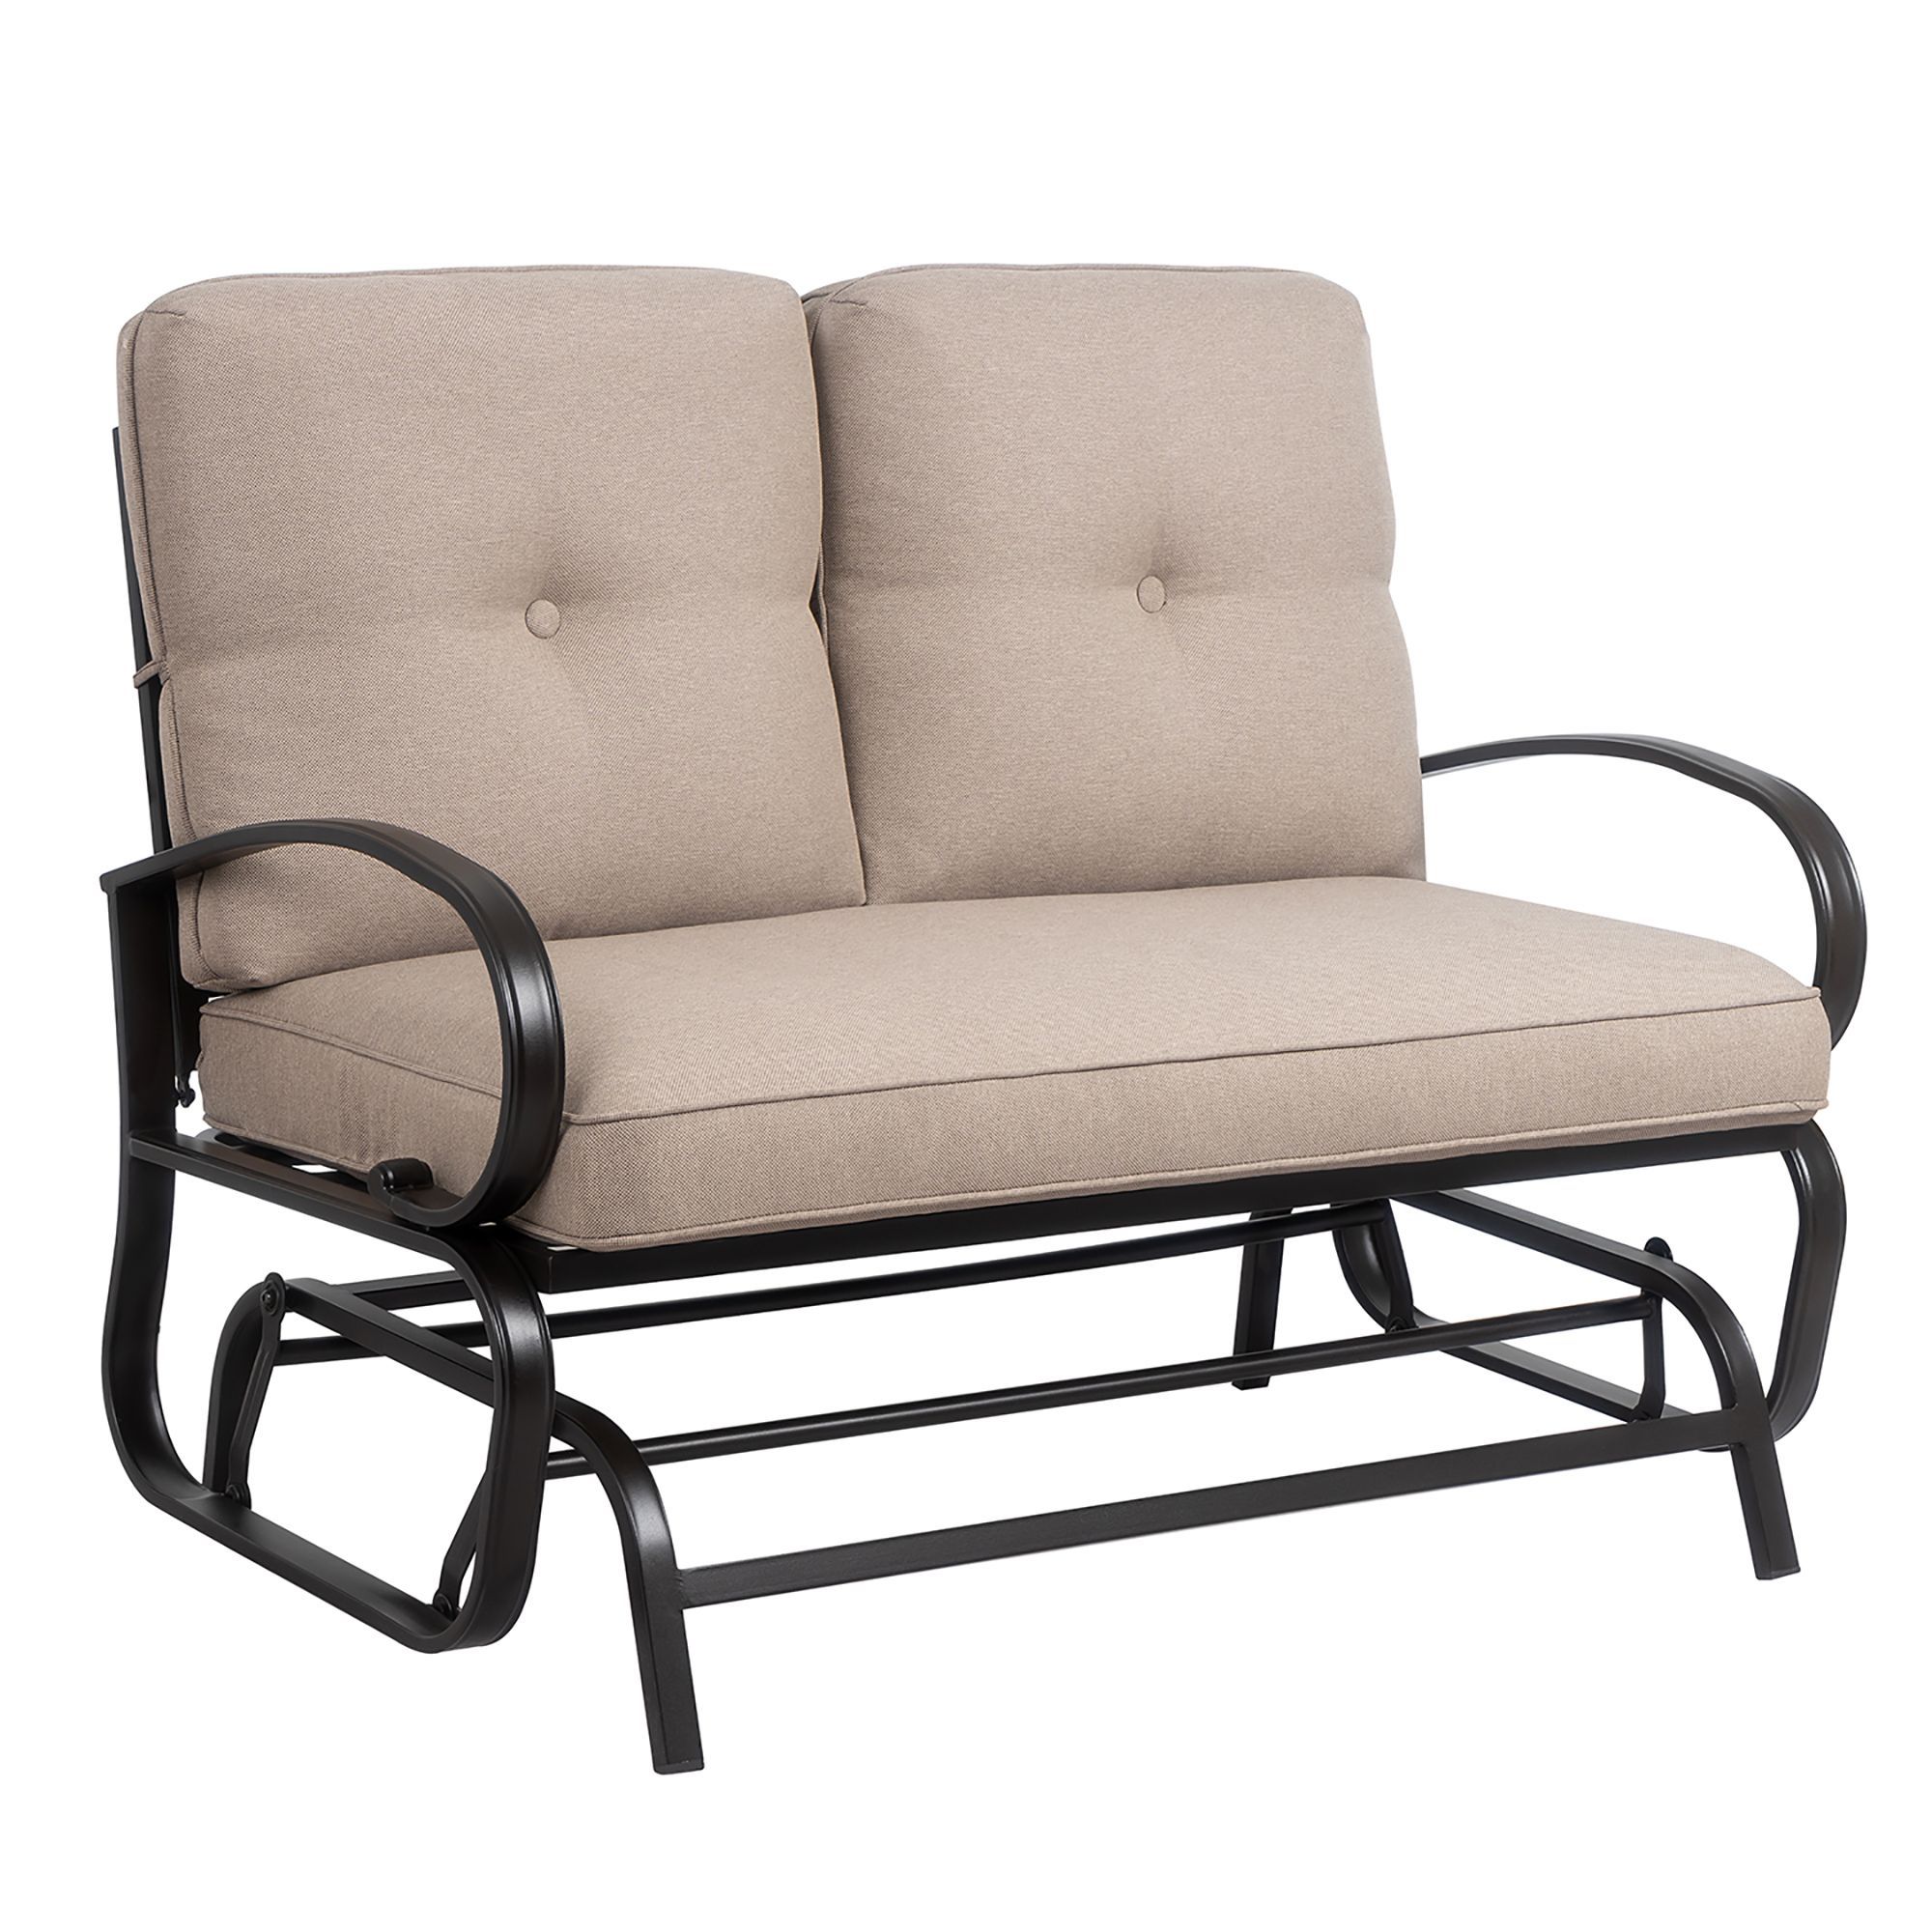 Loveseat Outdoor Patio Glider Rocking Bench,porch Furniture With Iron Grove Slatted Glider Benches (View 17 of 26)